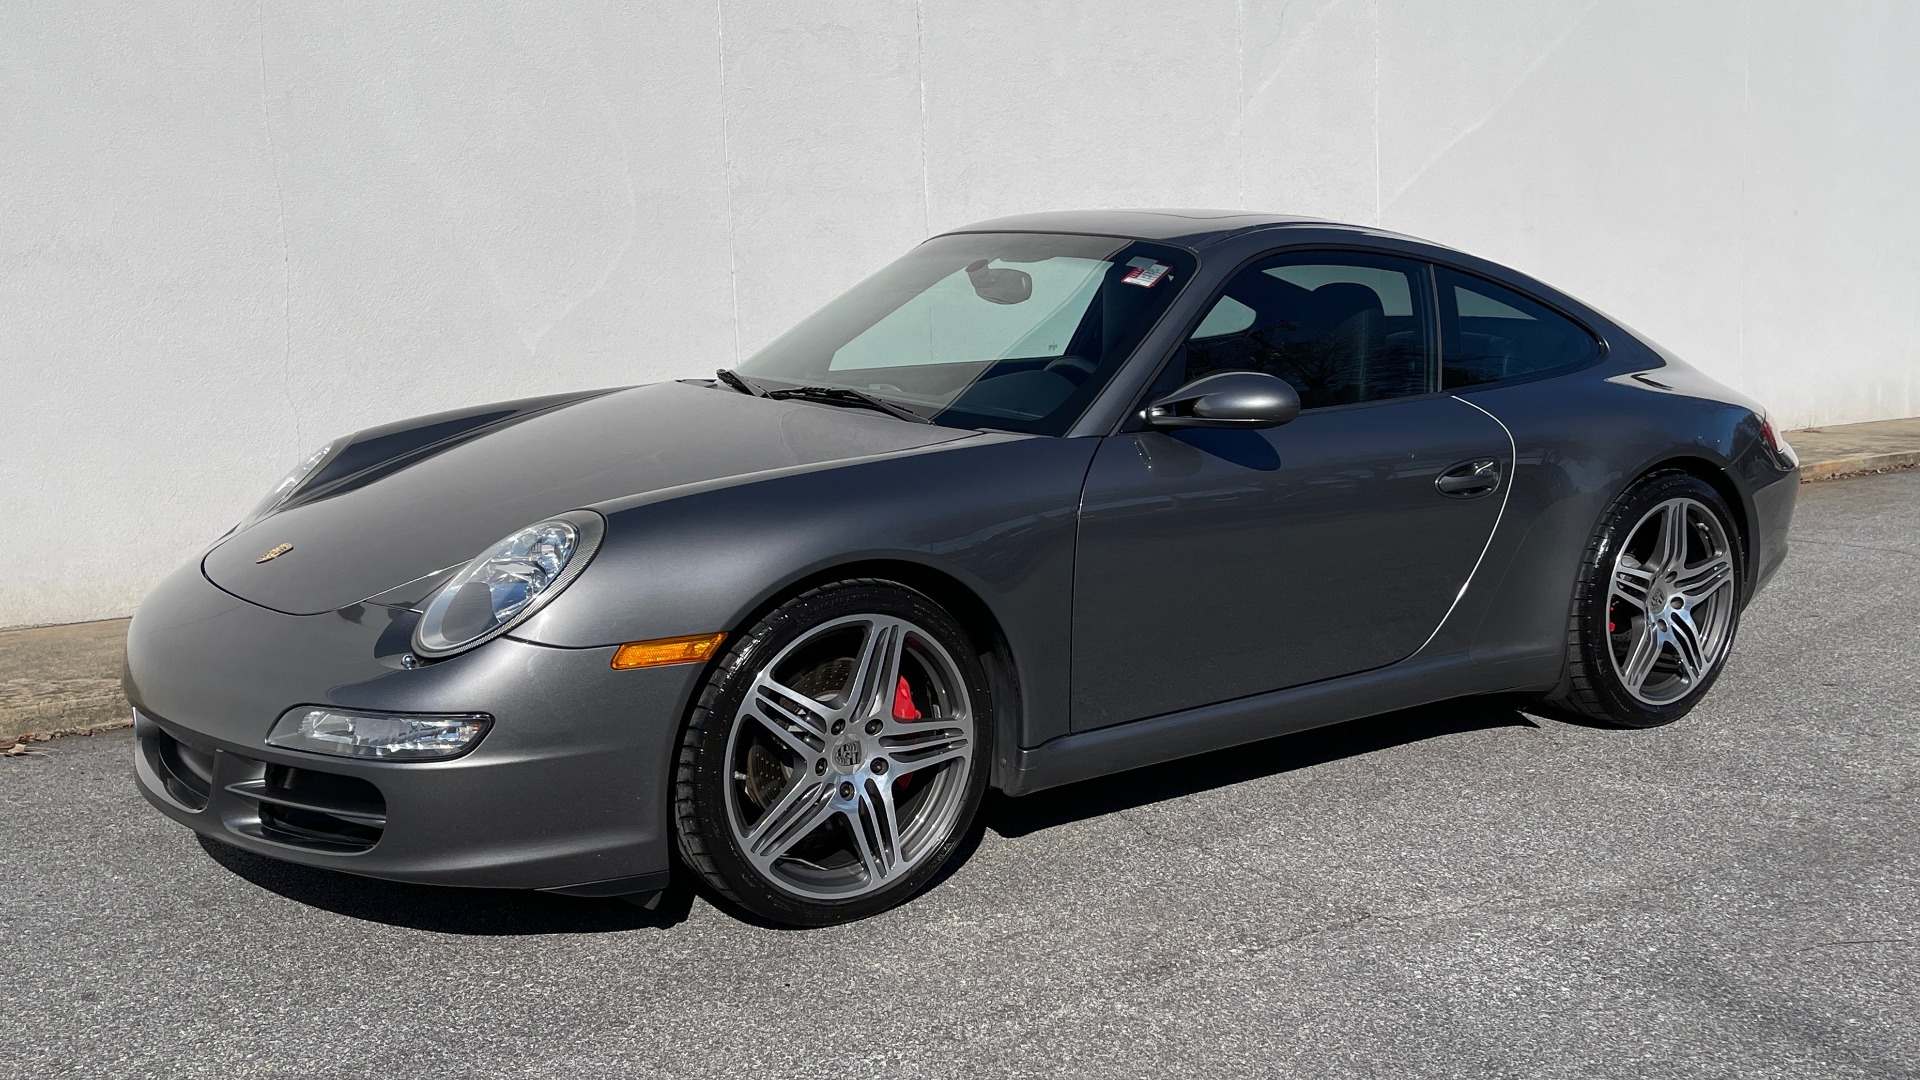 Used 2008 Porsche 911 CARRERA S COUPE / 3.8L / 6-SPEED MANUAL / BOSE for sale Sold at Formula Imports in Charlotte NC 28227 2